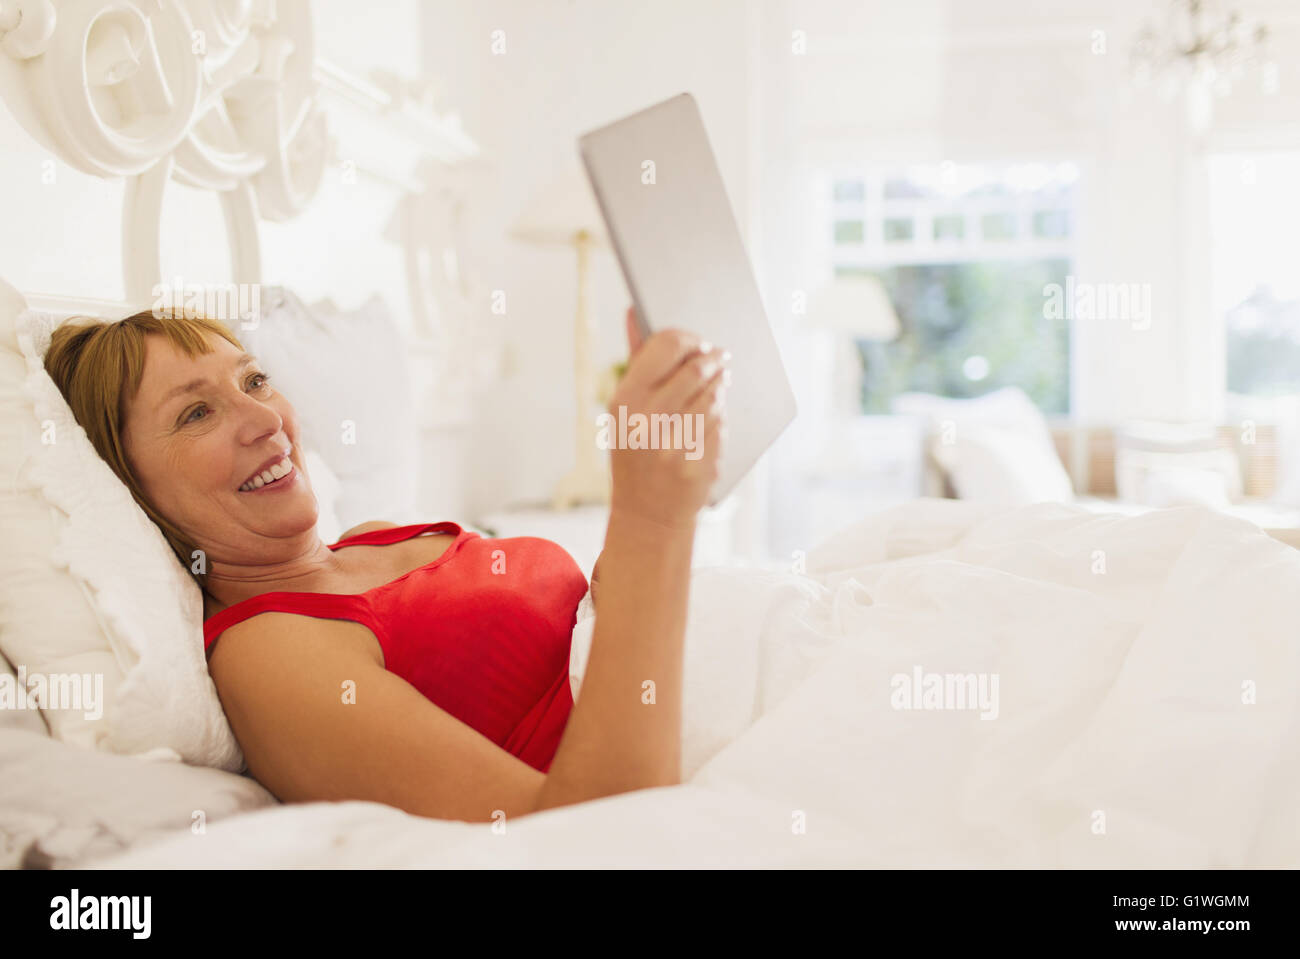 Smiling mature woman using digital tablet in bed Stock Photo